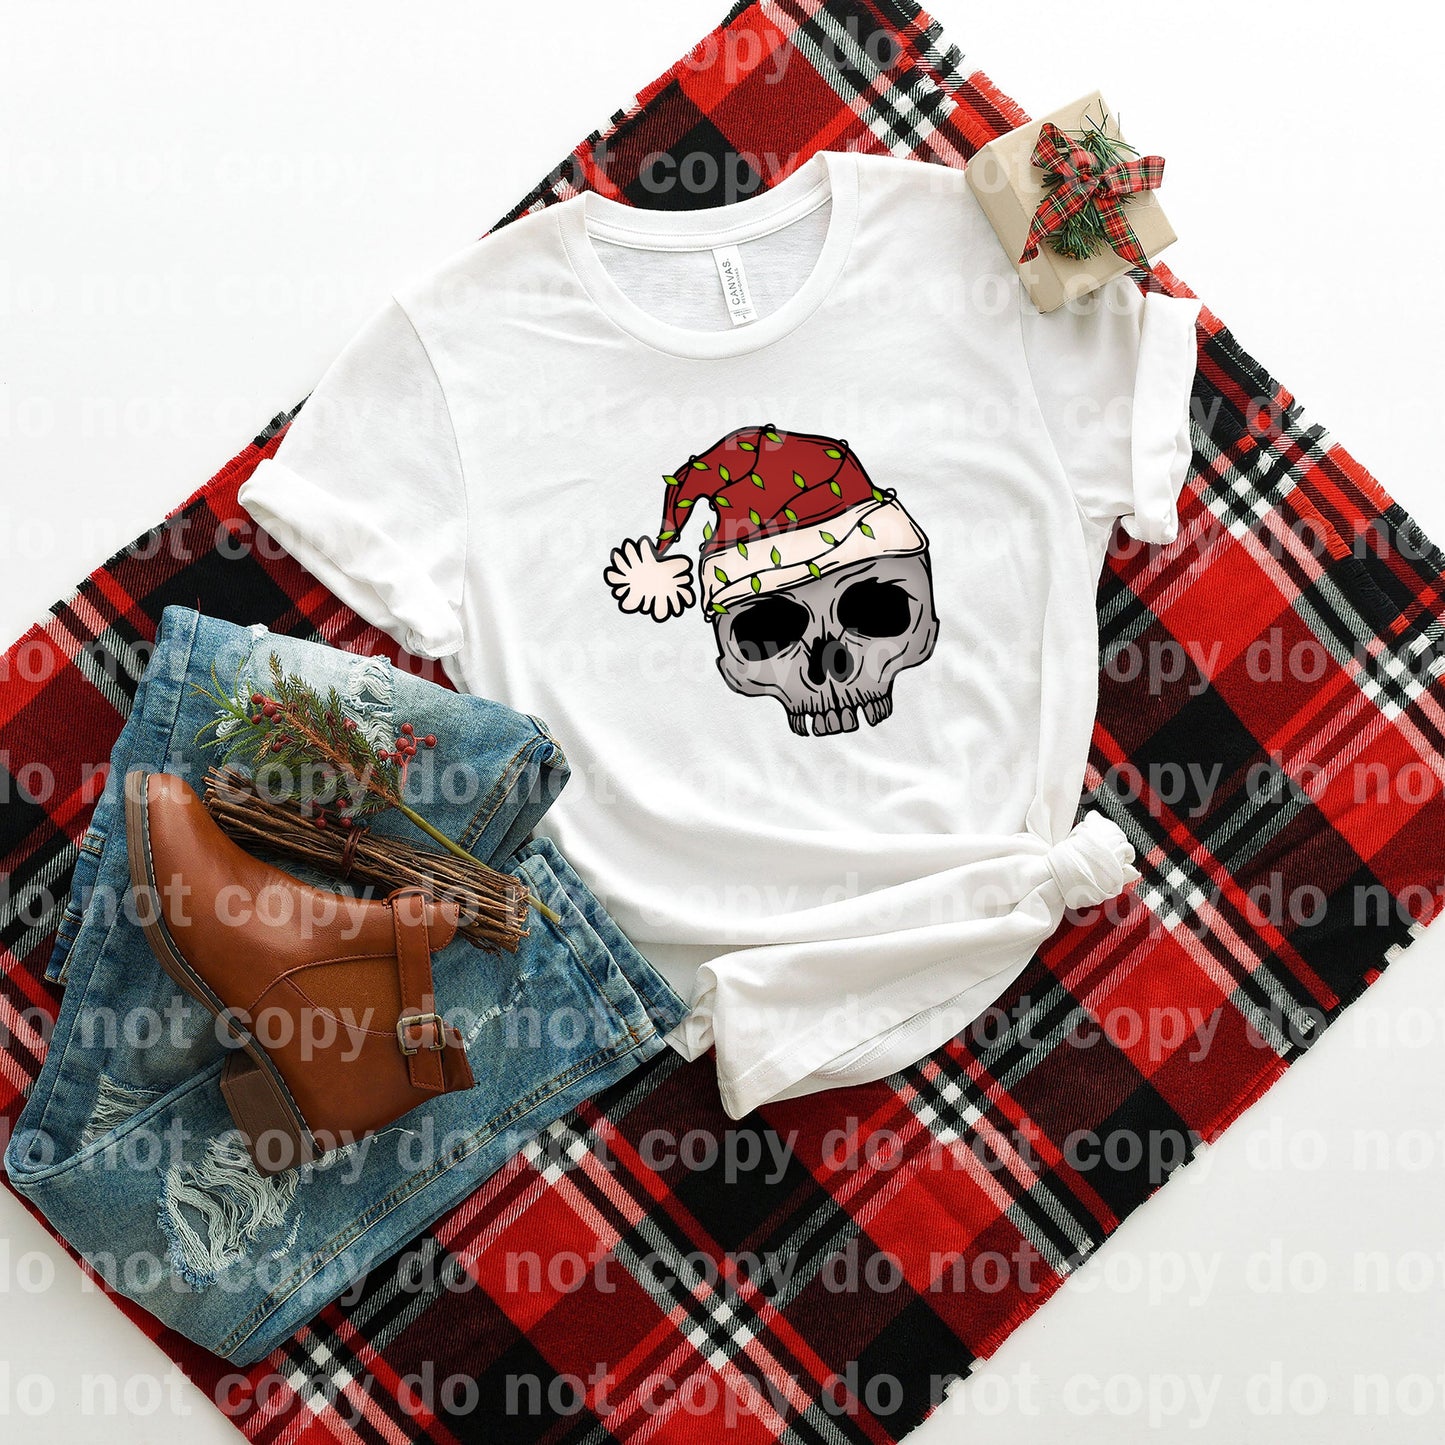 So Merry Lights Full Color/One Color Dream Print or Sublimation Print